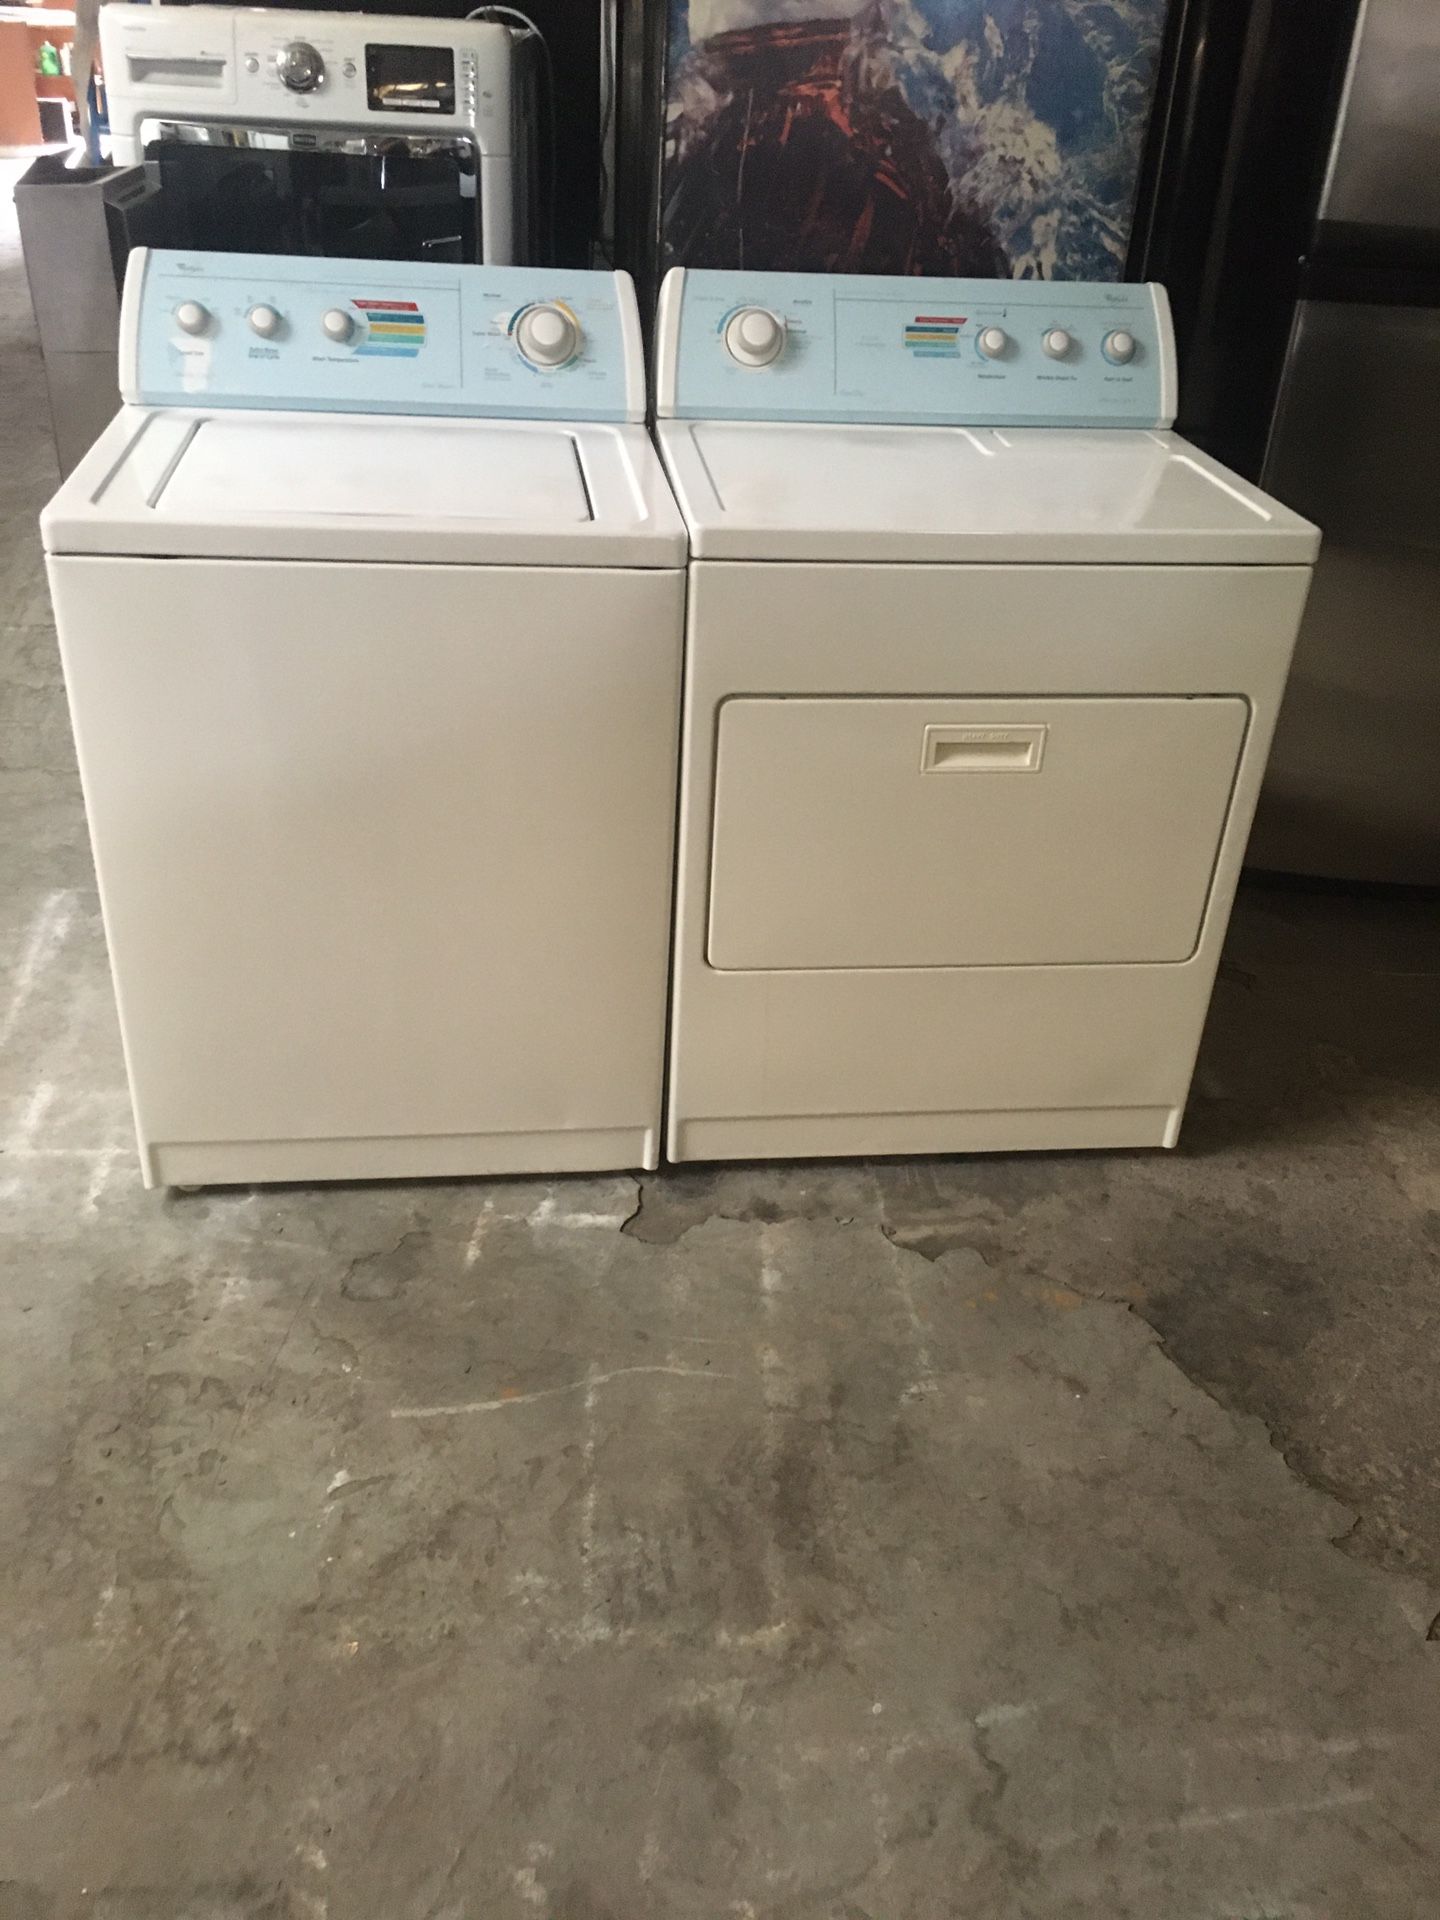 Set washer and dryer brand whirlpool electric dryer everything is good working condition 90 days warranty delivery and installation